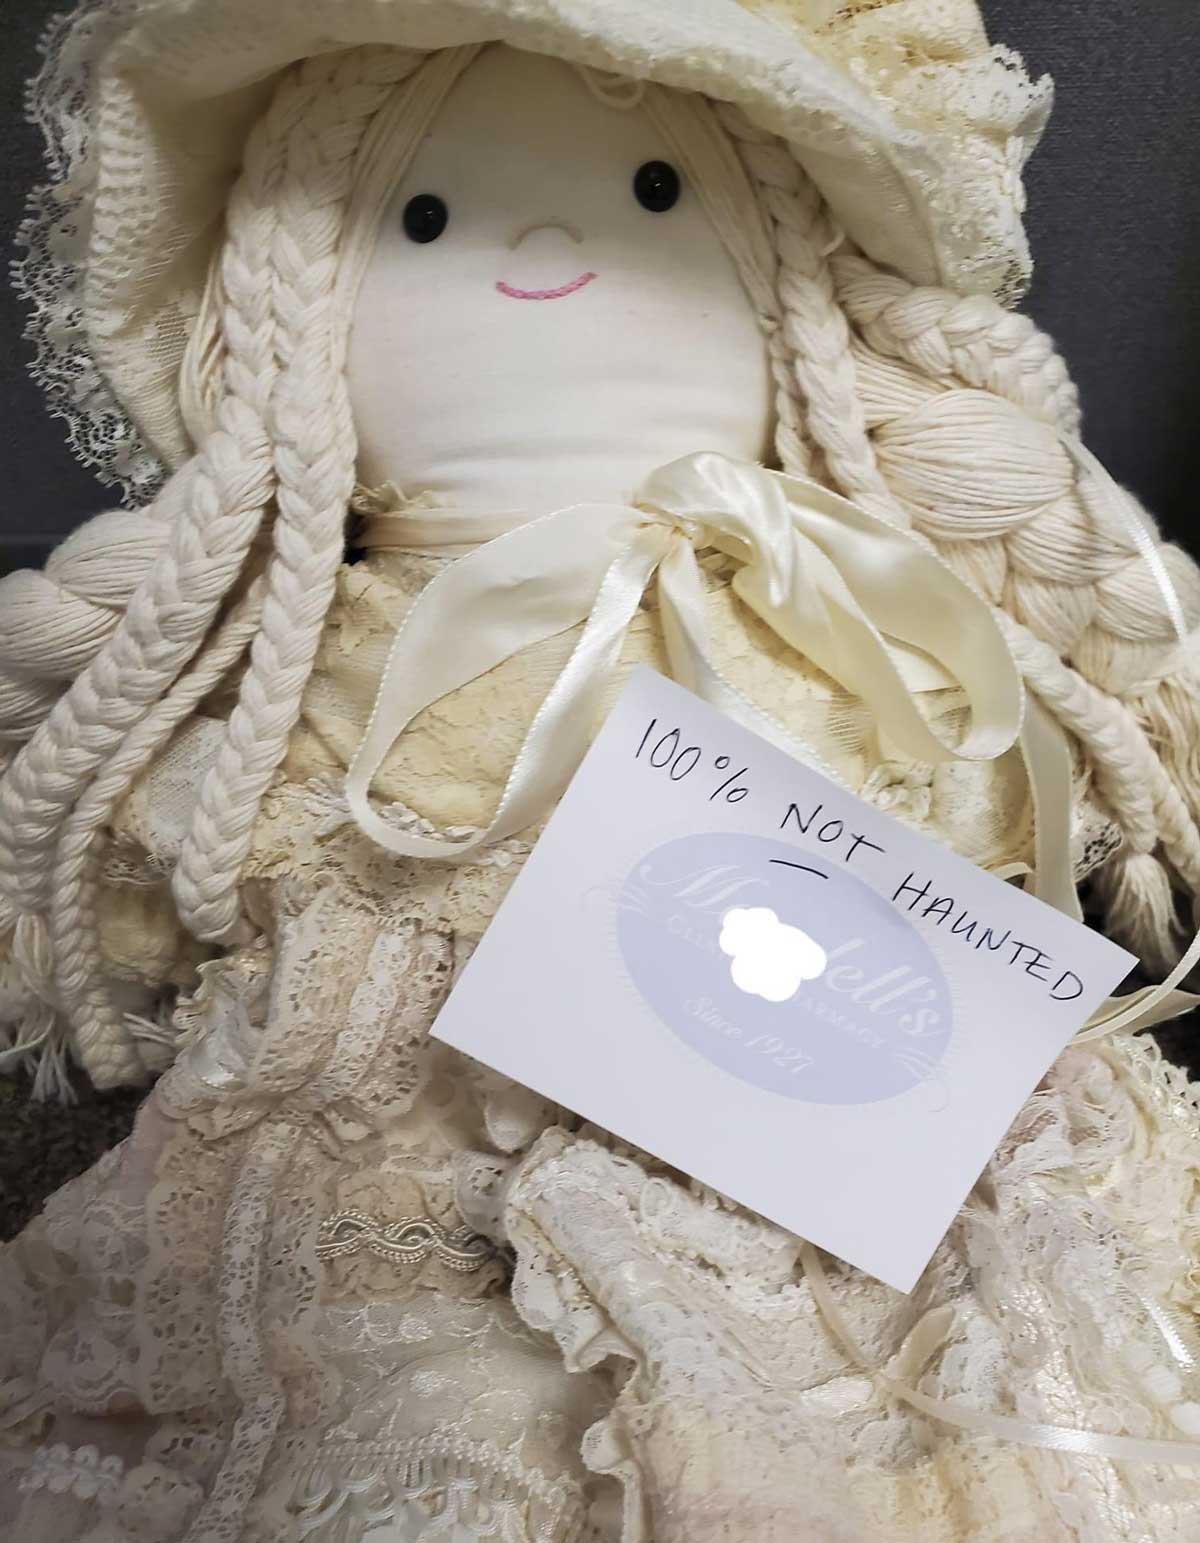 This handmade doll was donated to a silent auction I'm working on